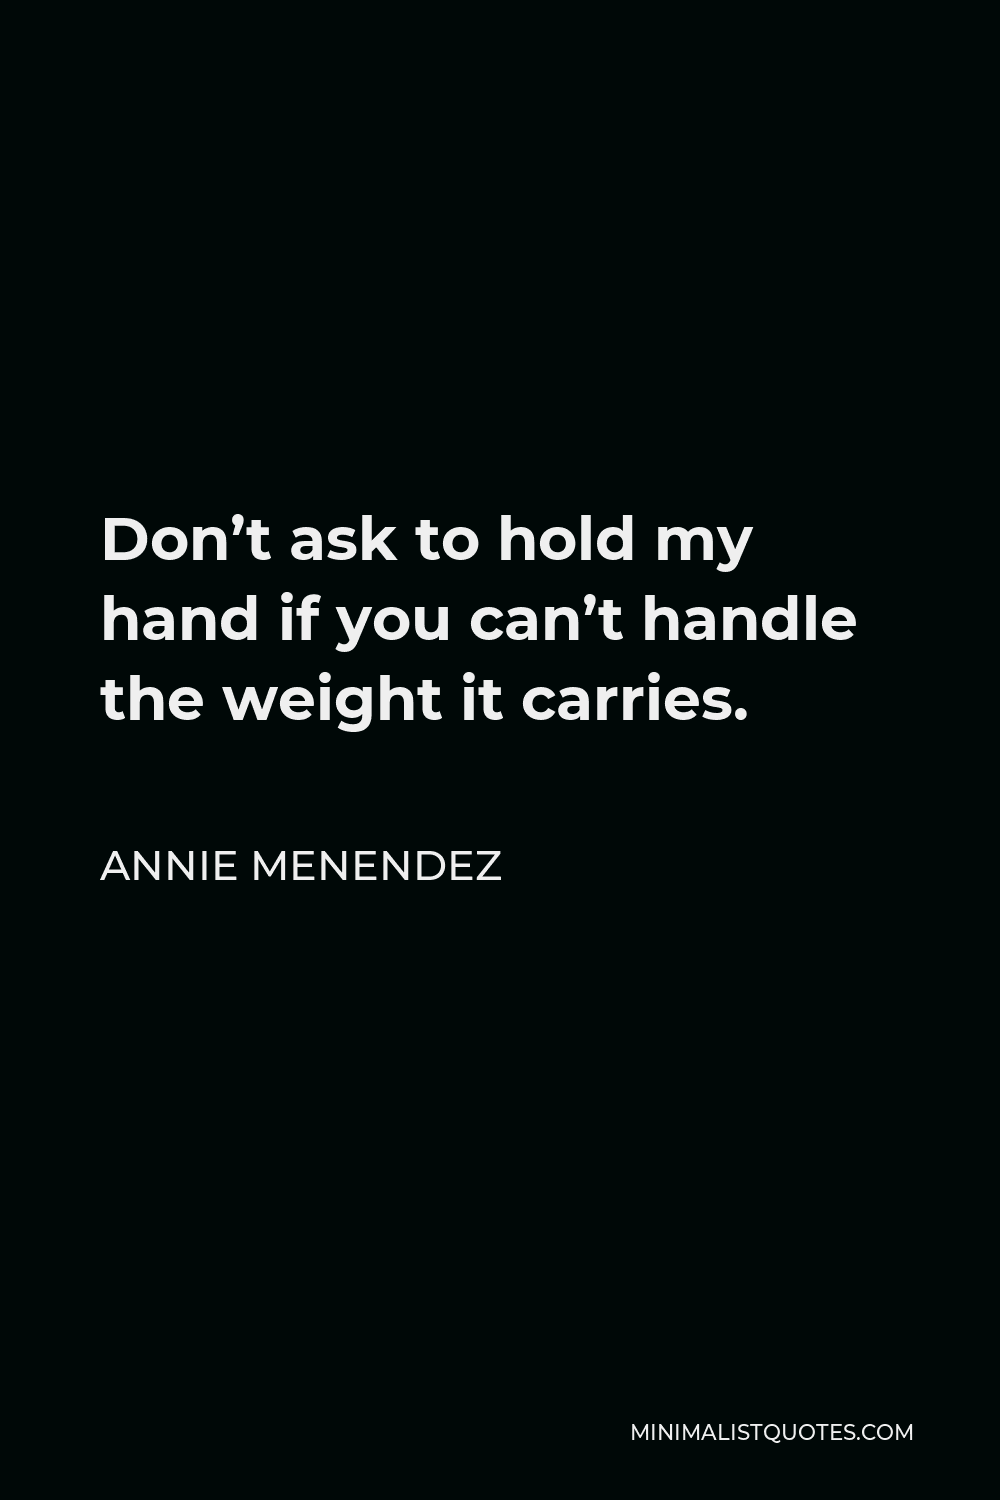 Annie Menendez Quote - Don’t ask to hold my hand if you can’t handle the weight it carries.